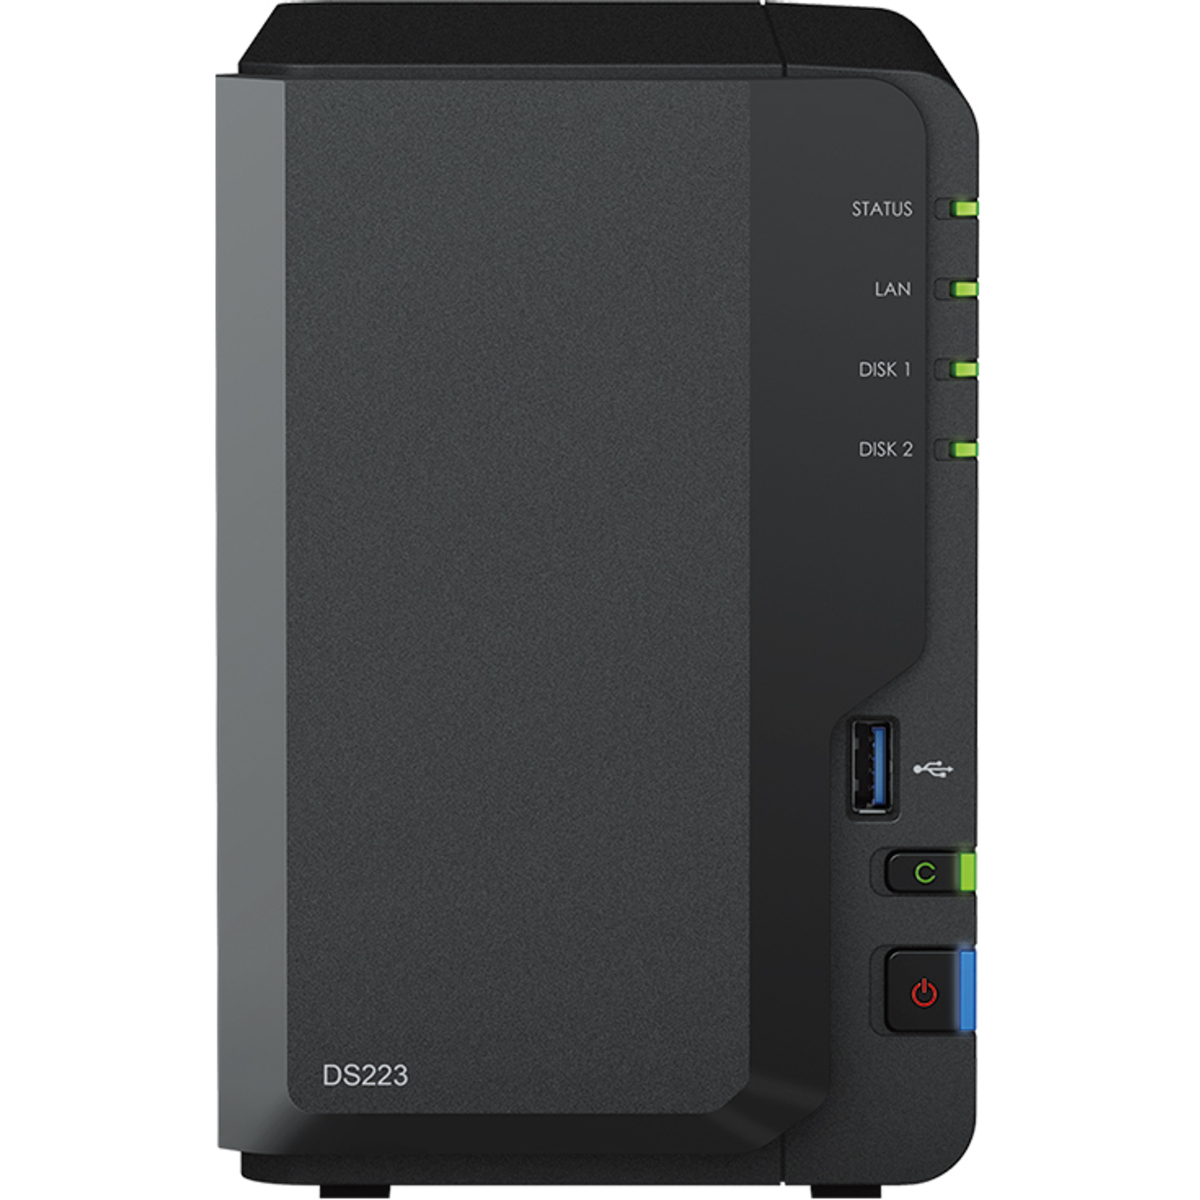 Synology DiskStation DS223 24tb 2-Bay Desktop Personal / Basic Home / Small Office NAS - Network Attached Storage Device 2x12tb Western Digital Red Plus WD120EFBX 3.5 7200rpm SATA 6Gb/s HDD NAS Class Drives Installed - Burn-In Tested DiskStation DS223